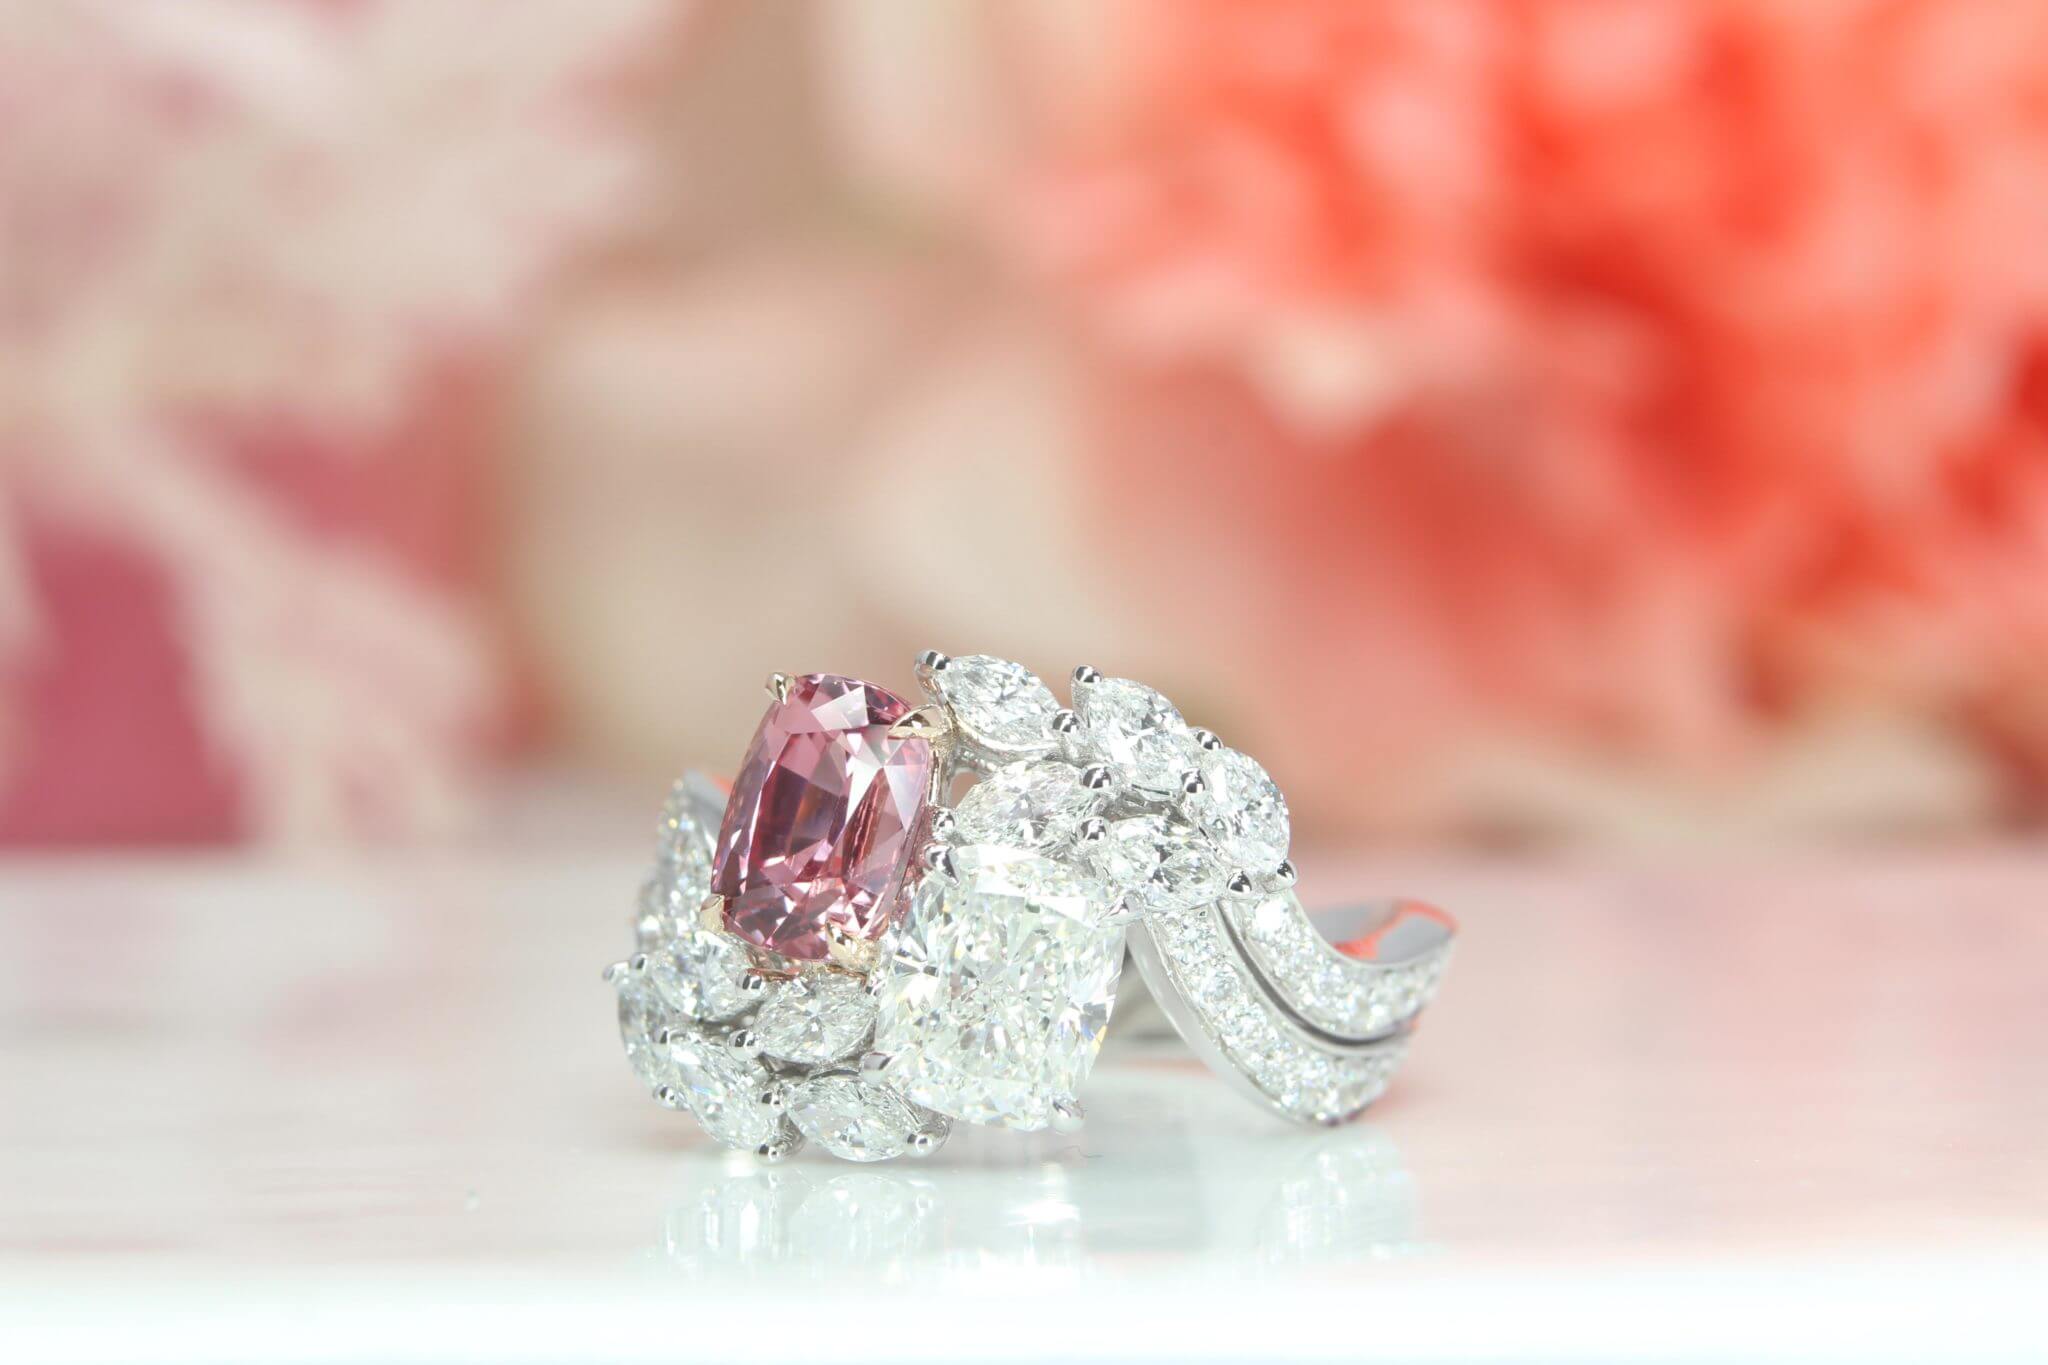 “Toi et Moi” Ring, Sapphire Padparadscha with Cushion, Marquise, Round Brilliant Diamond - Unique Custom made ring for a perfect wedding | Local Singapore Custom Jewellery in Wedding Jewellery with padparadscha sapphire gemstone and diamond.